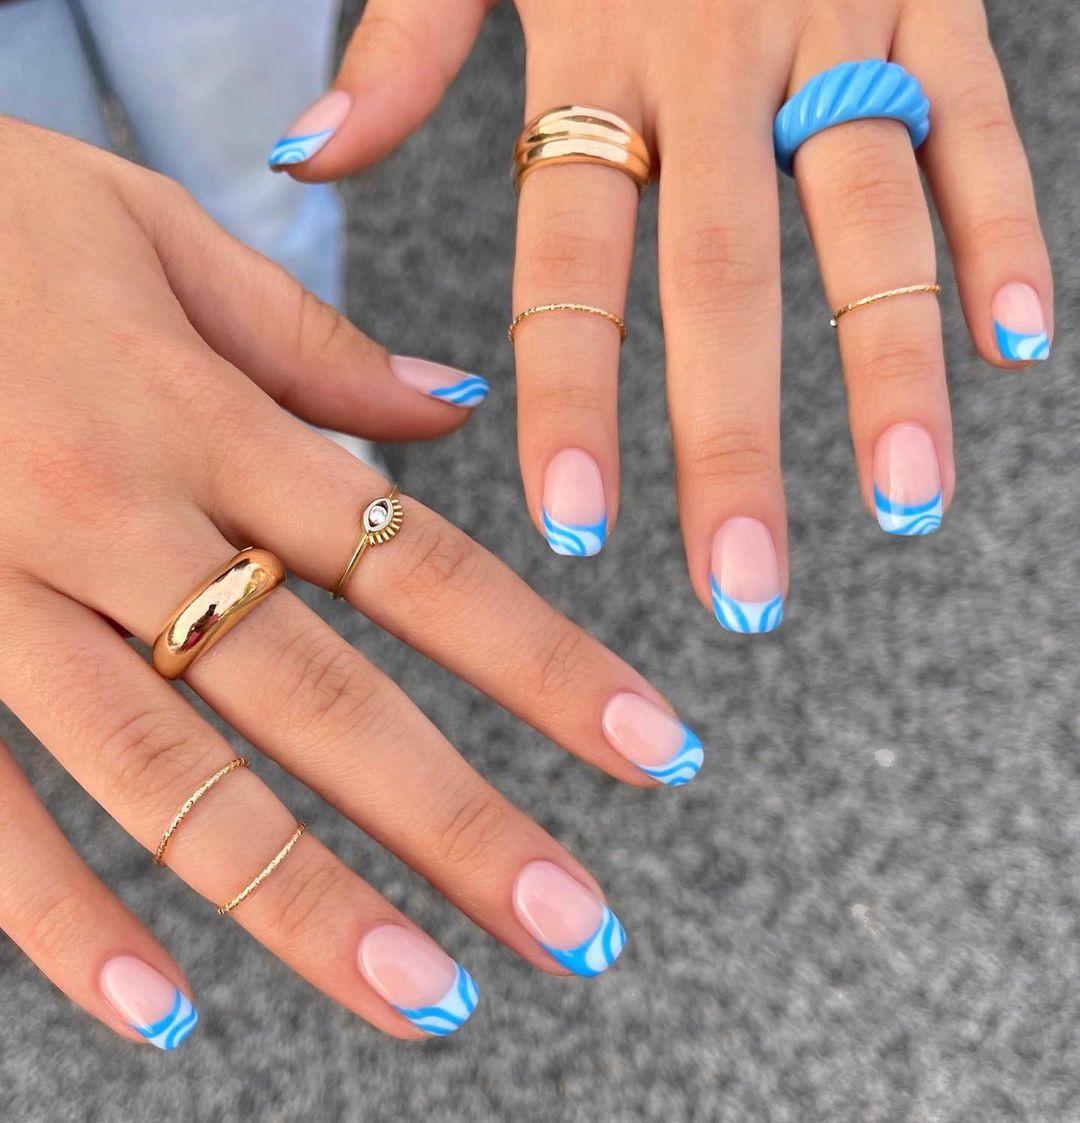 40 Stunning Manicure Ideas For Short Nails 21 Short Gel Nail Arts Her Style Code